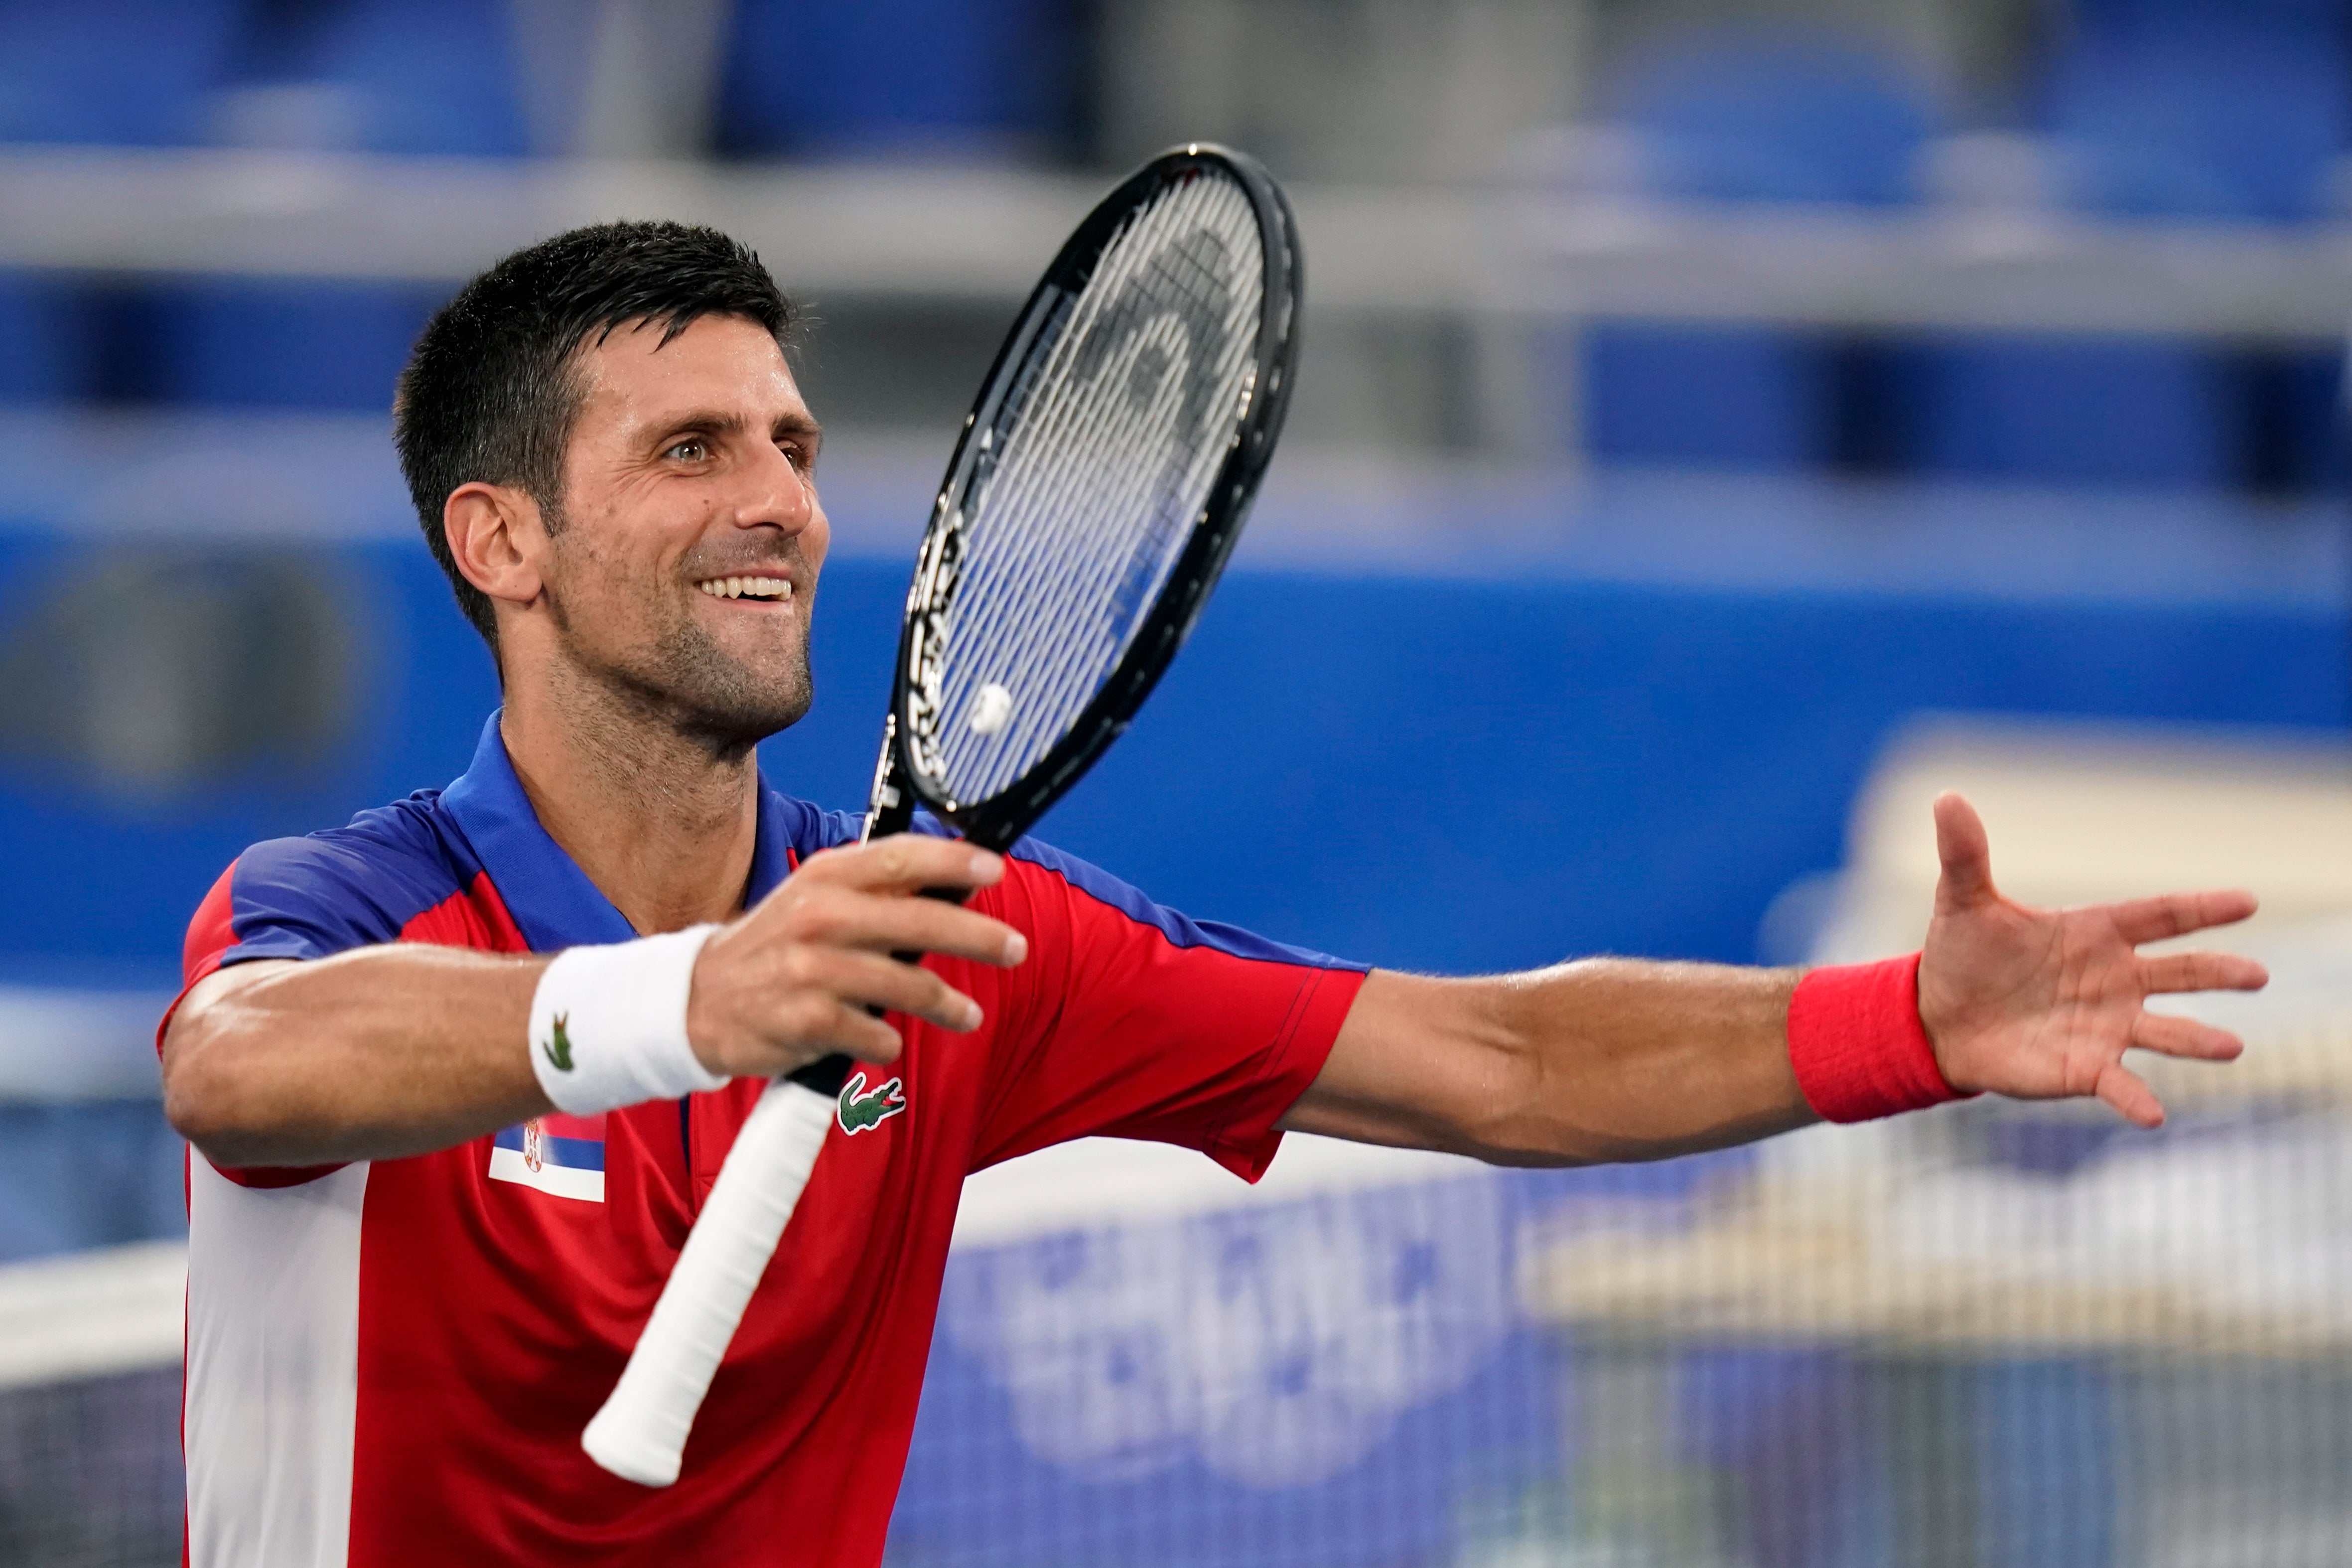 Novak Djokovic will face a qualifier in the first round at the US Open